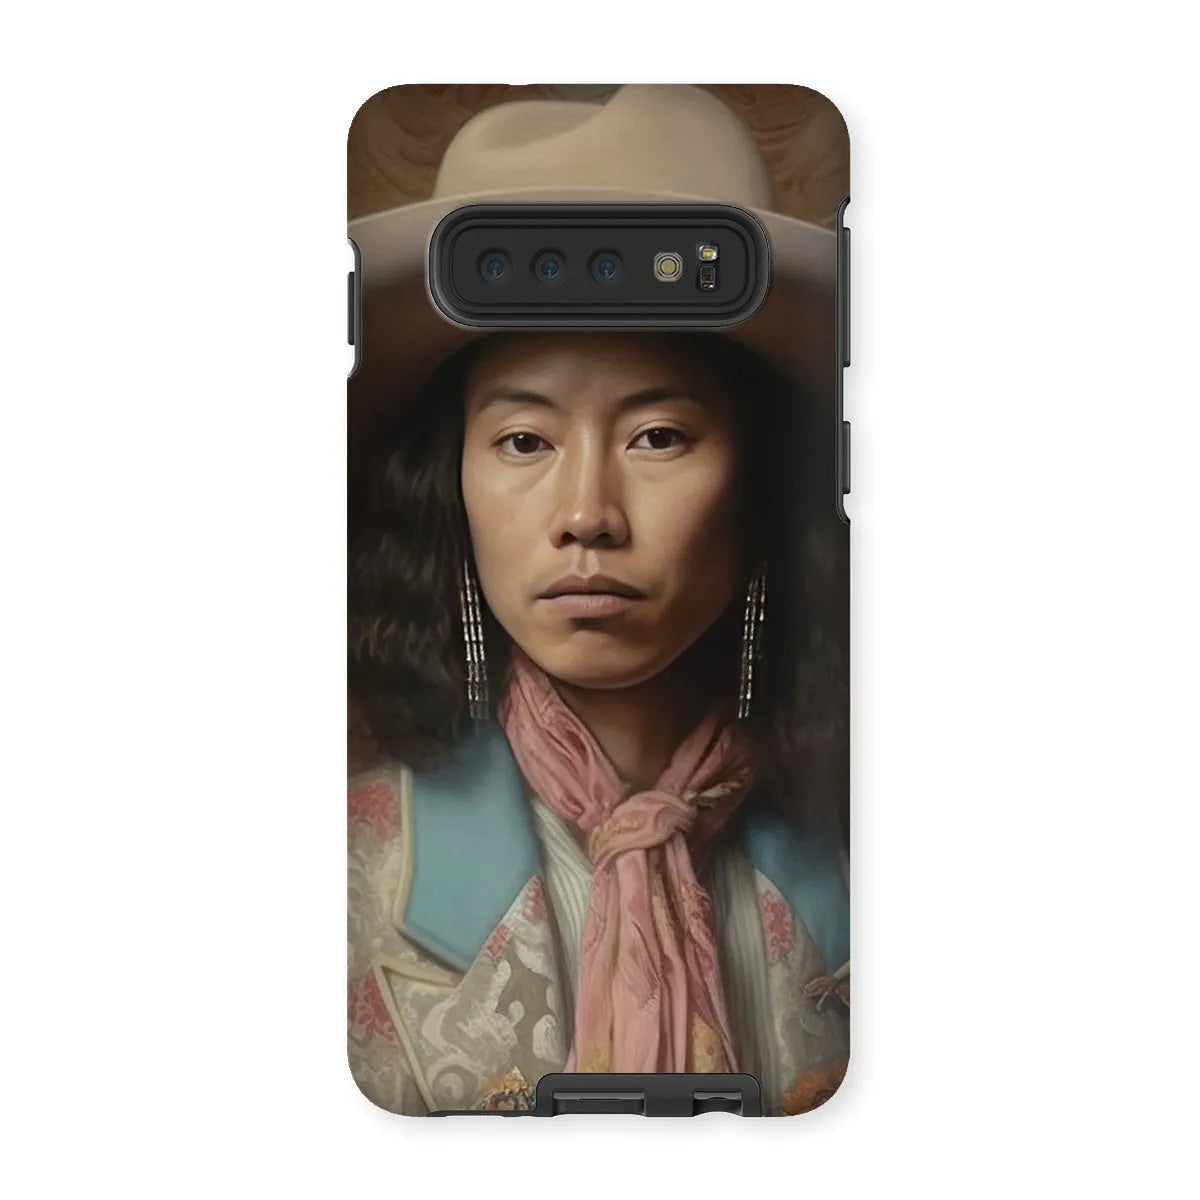 Dorjee The Gay Cowboy - Dandy Gay Aesthetic Art Phone Case - Samsung Galaxy S10 / Matte - Mobile Phone Cases